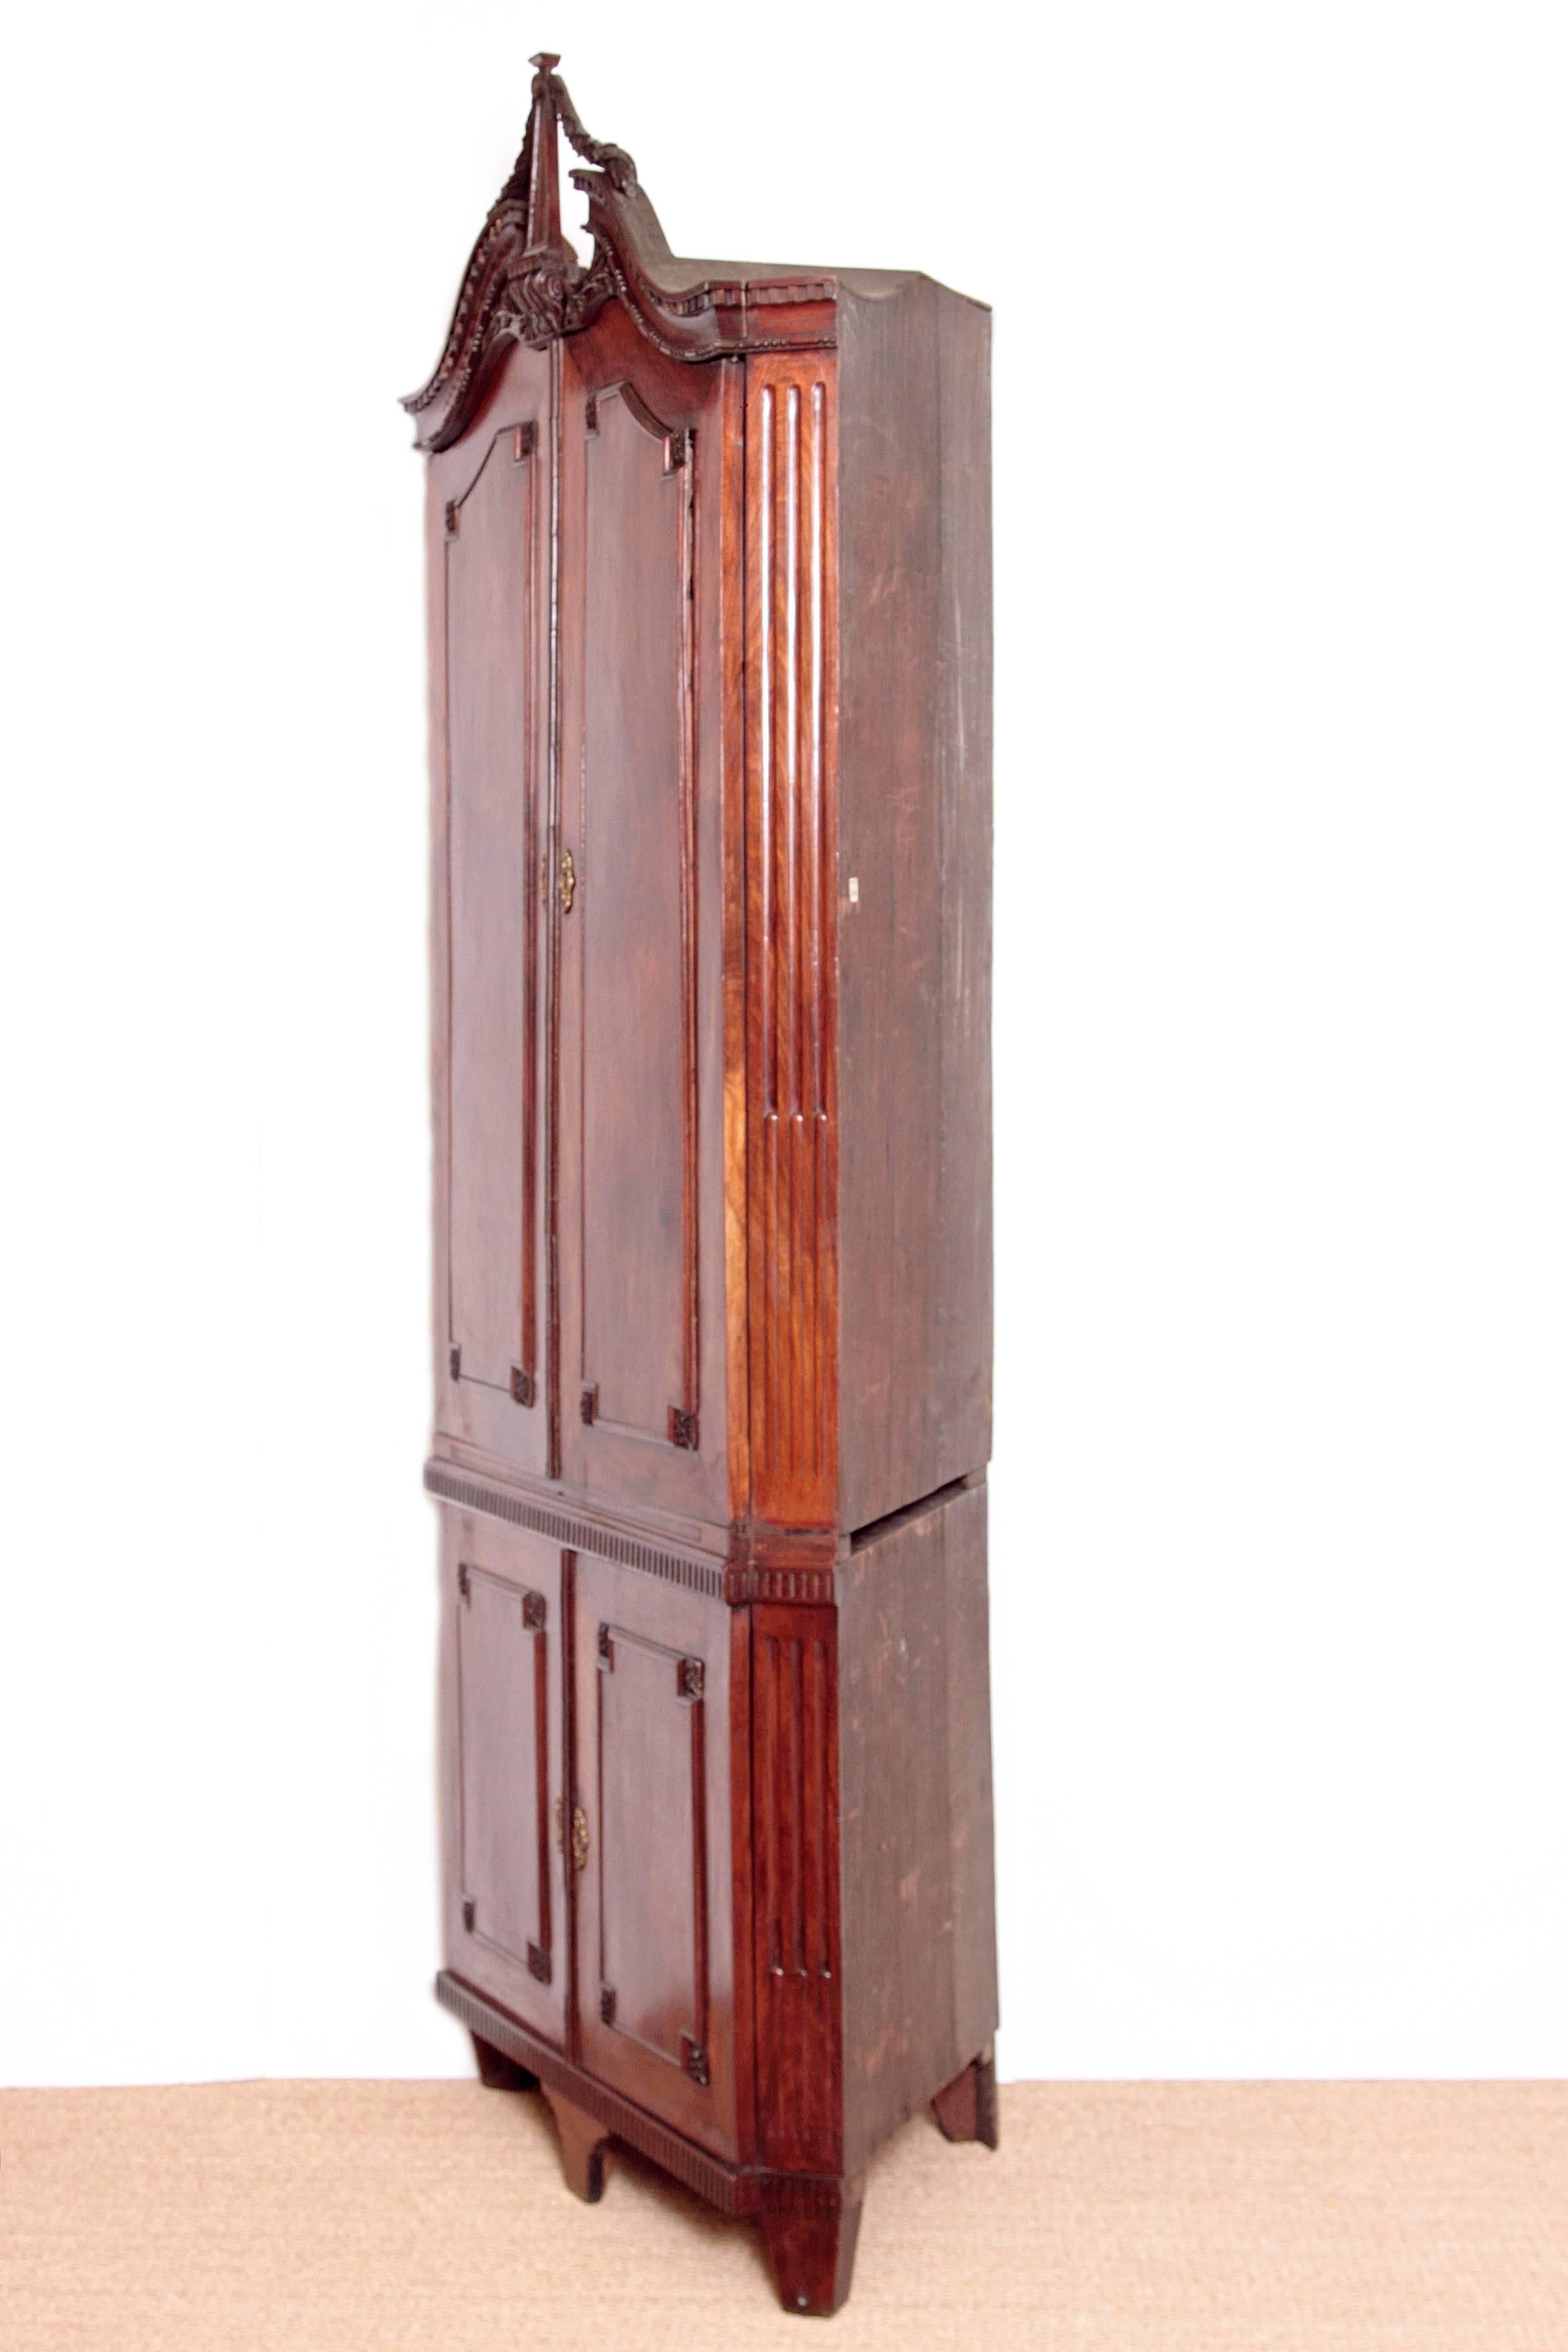 An 18th century continental corner cabinet of mahogany in the English taste with split pediment at top with dentil detailing. Carved swag attaches the centre column. Carved floral detail below. Upper two doors with interior shaped shelves and two